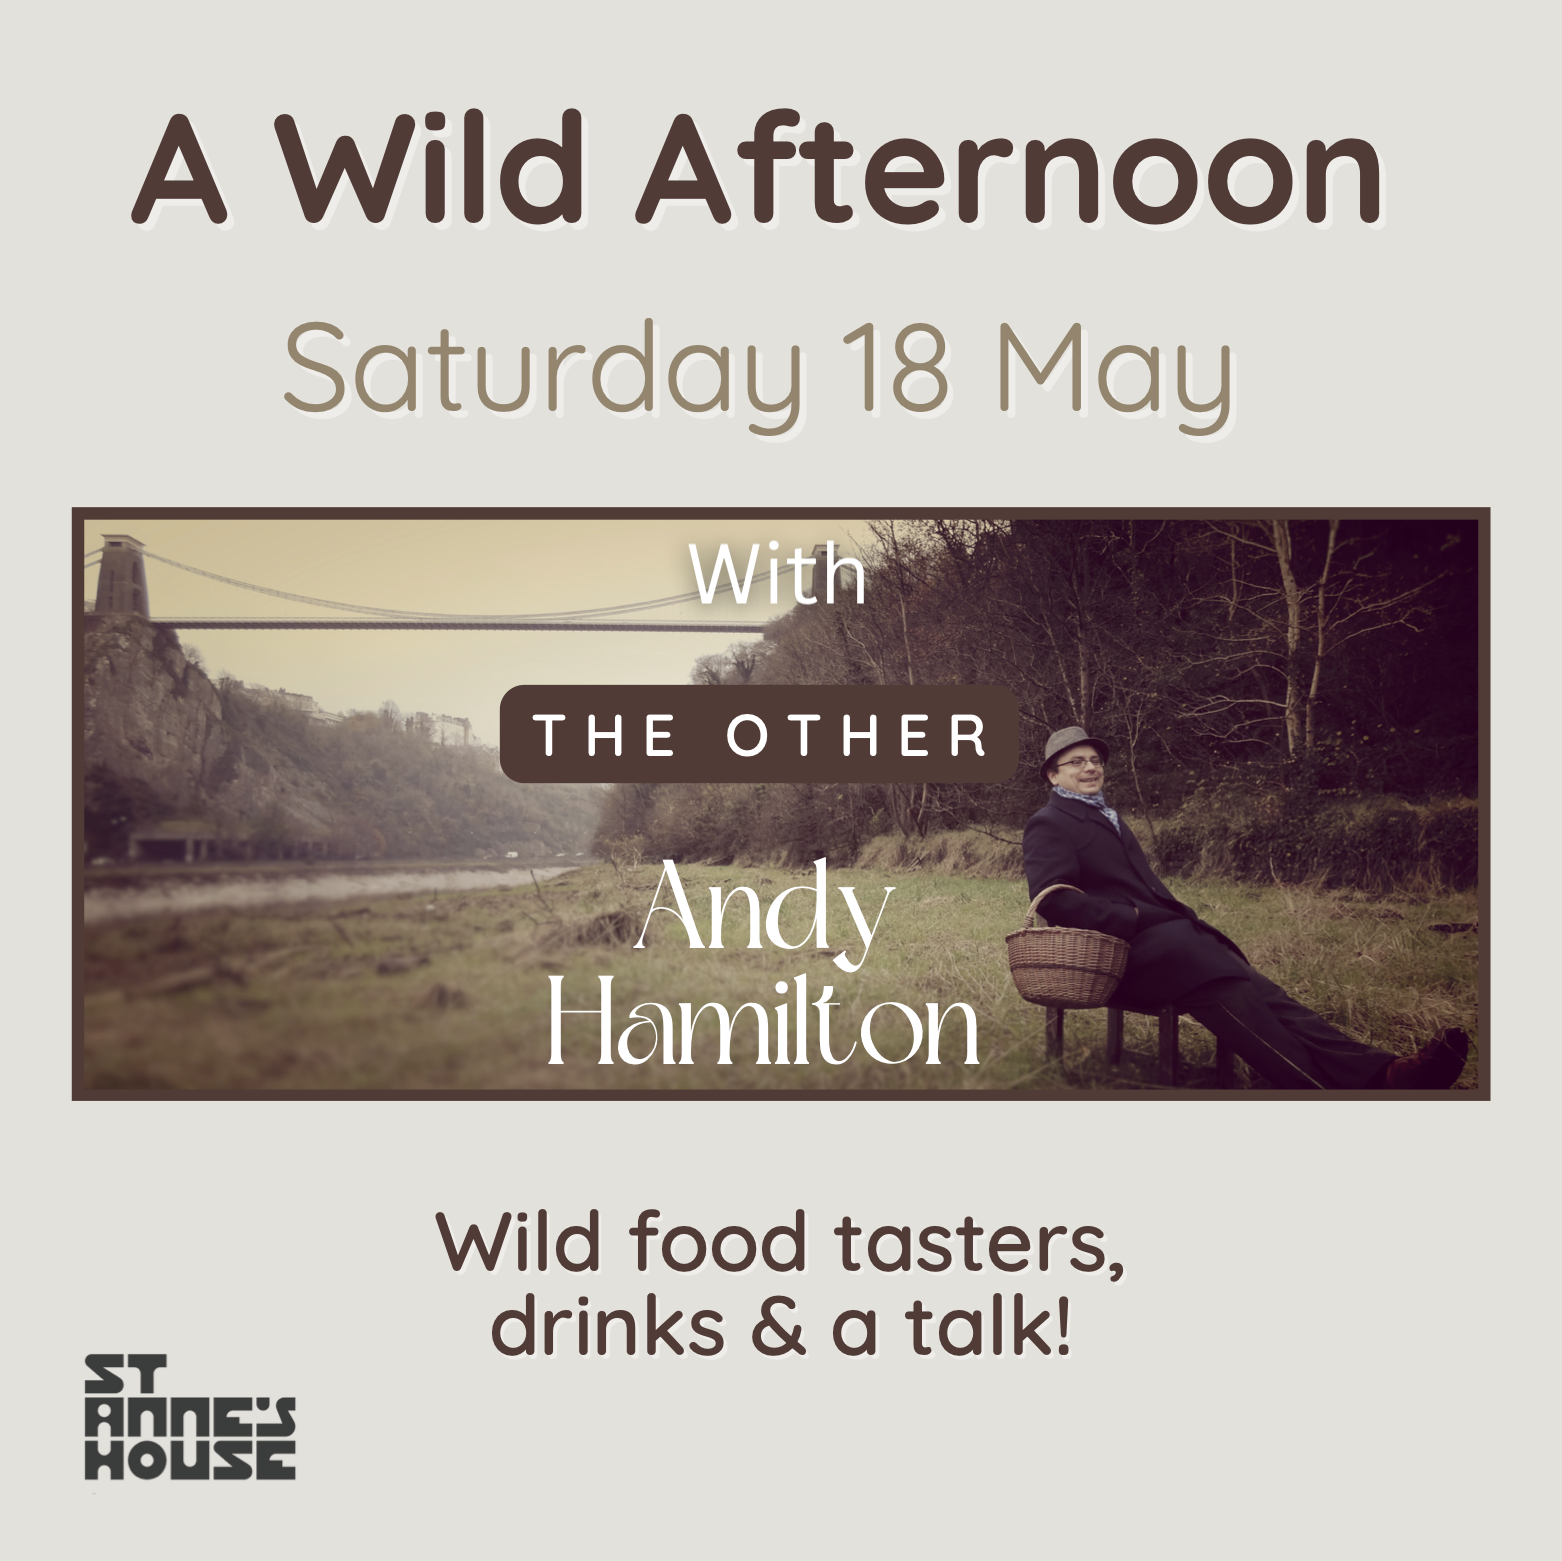 A graphic design with a photo of Andy Hamilton sat on a stall with a wicker basket down by the Suspension Bridge in Bristol. The text reads 'A Wild Afternoon, Saturday 18 May, with the other Andy Hamilton, wild food tasters, drinks and a talk!'